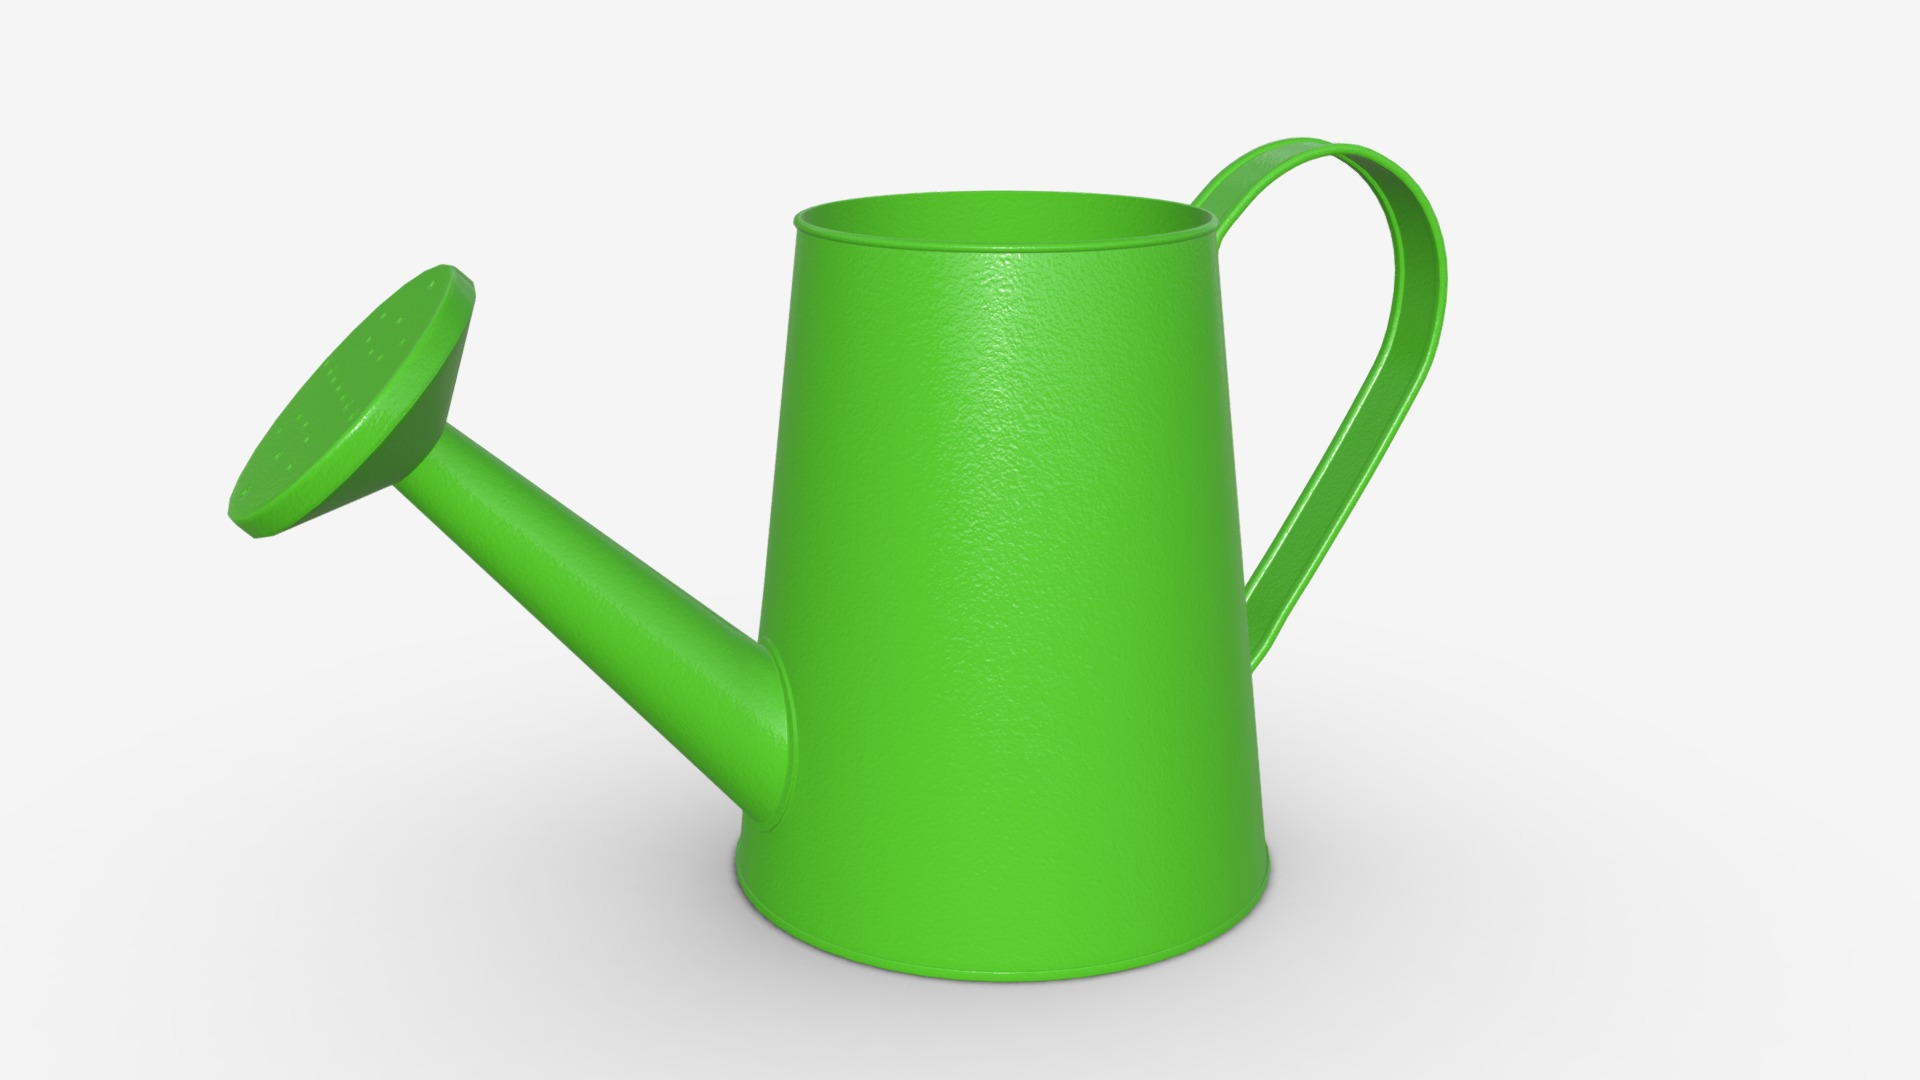 3D model Watering can green - This is a 3D model of the Watering can green. The 3D model is about a green watering can.